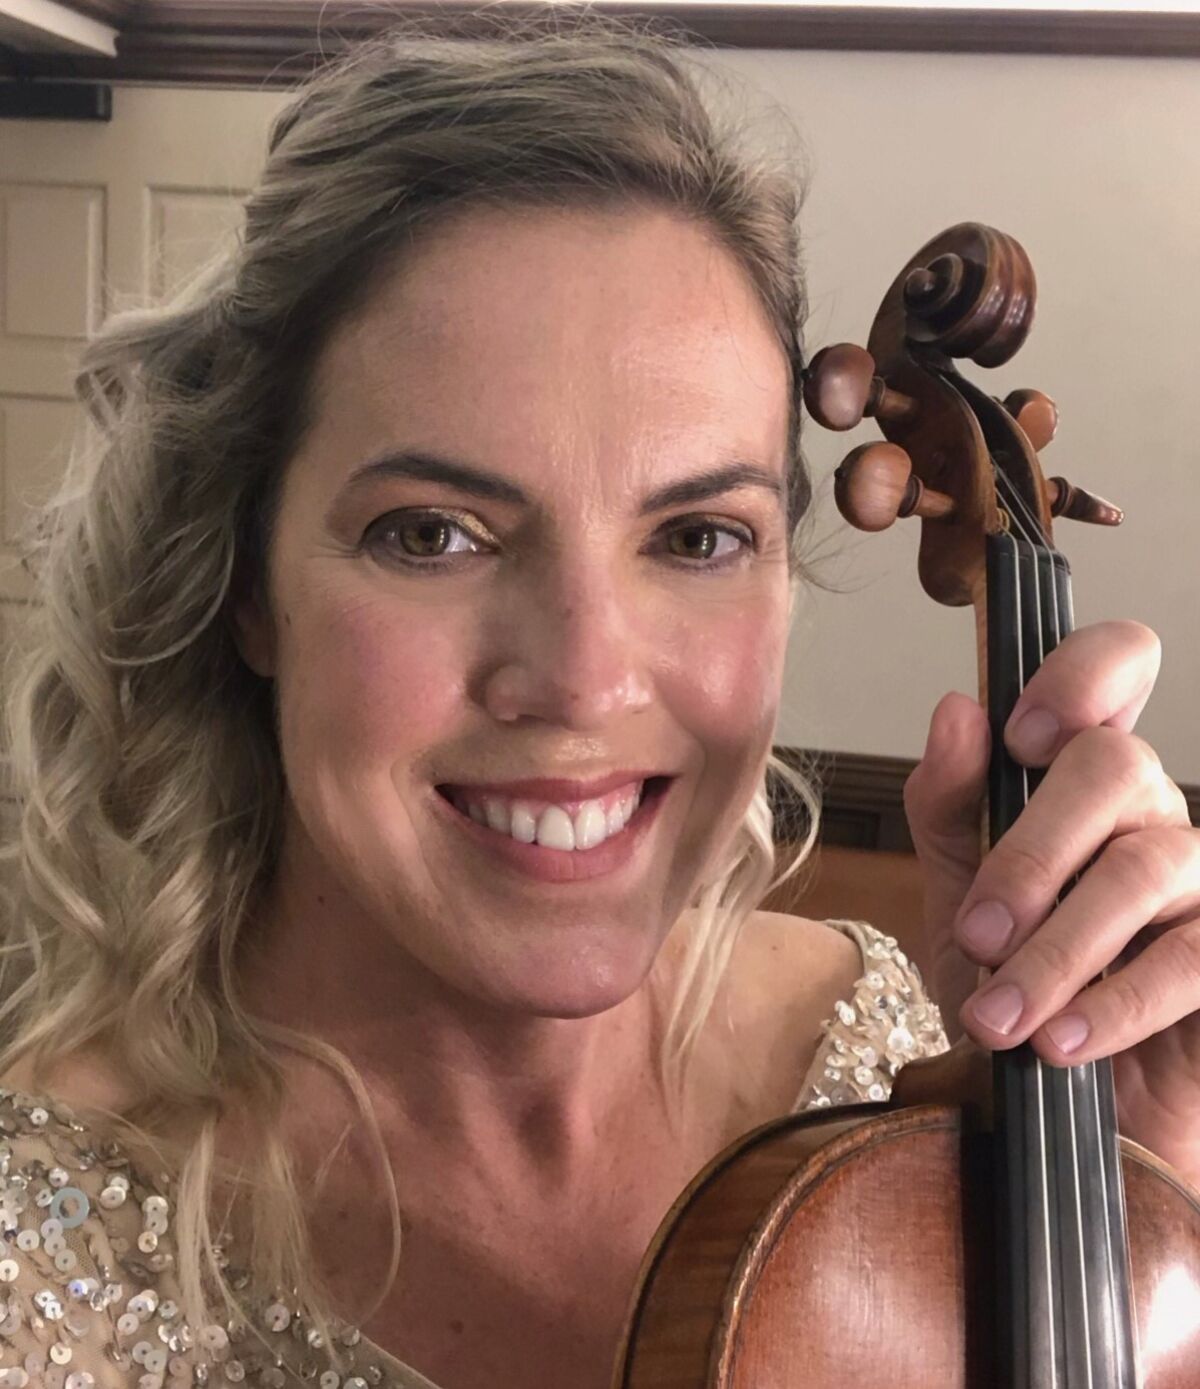 Violinist Jessica Guideri had been playing Le Salon concerts for seven years in Los Angeles.